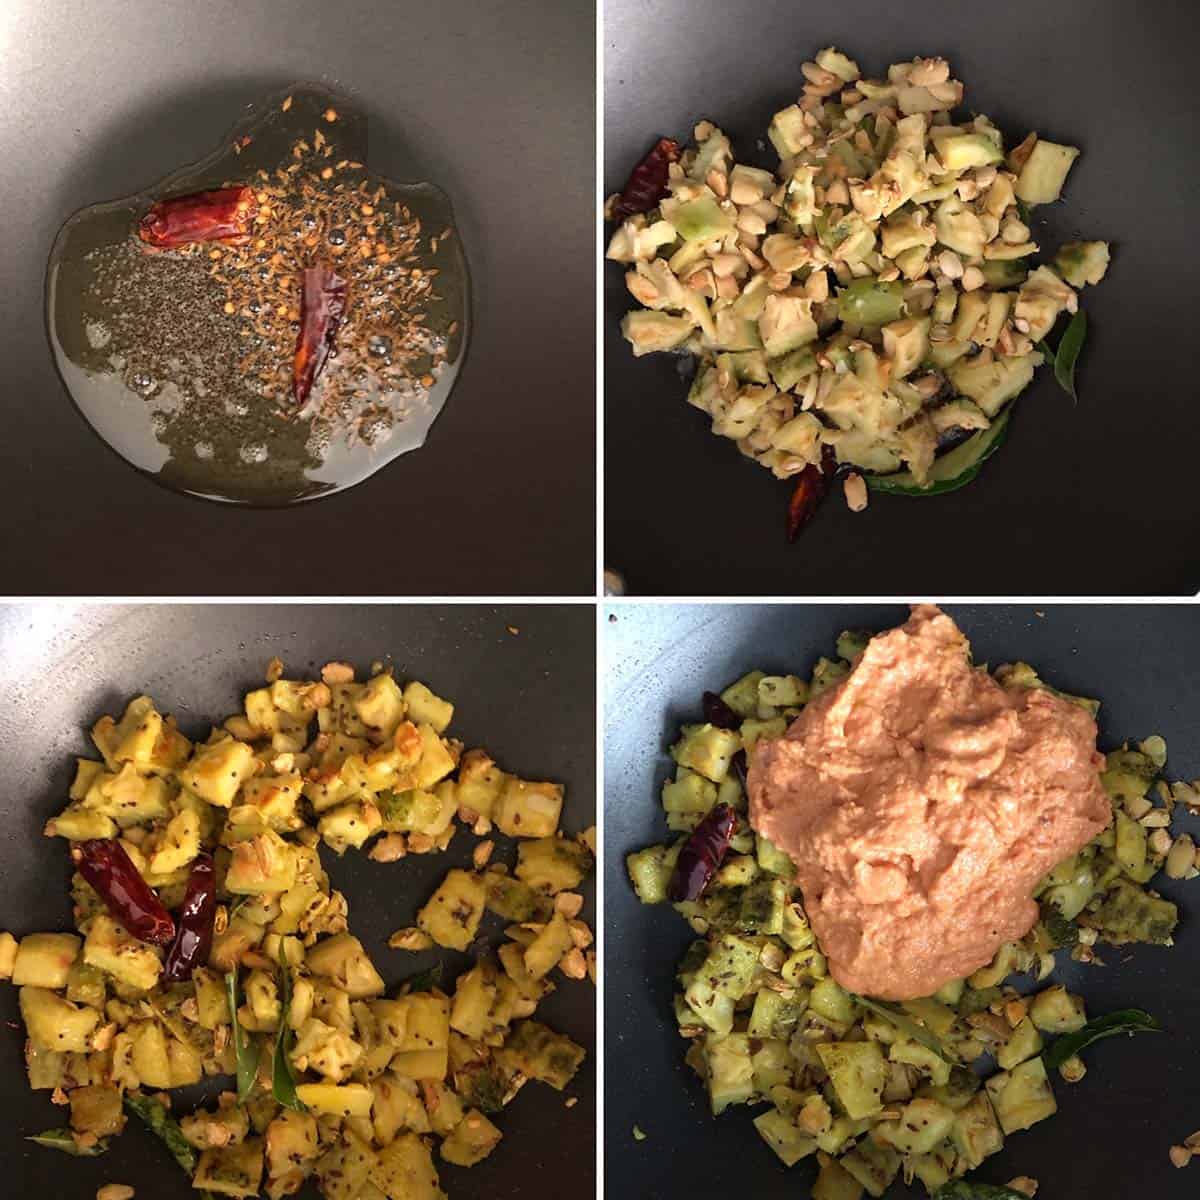 4 panel photo showing the sautéing of bitter gourd and addition of gravy.